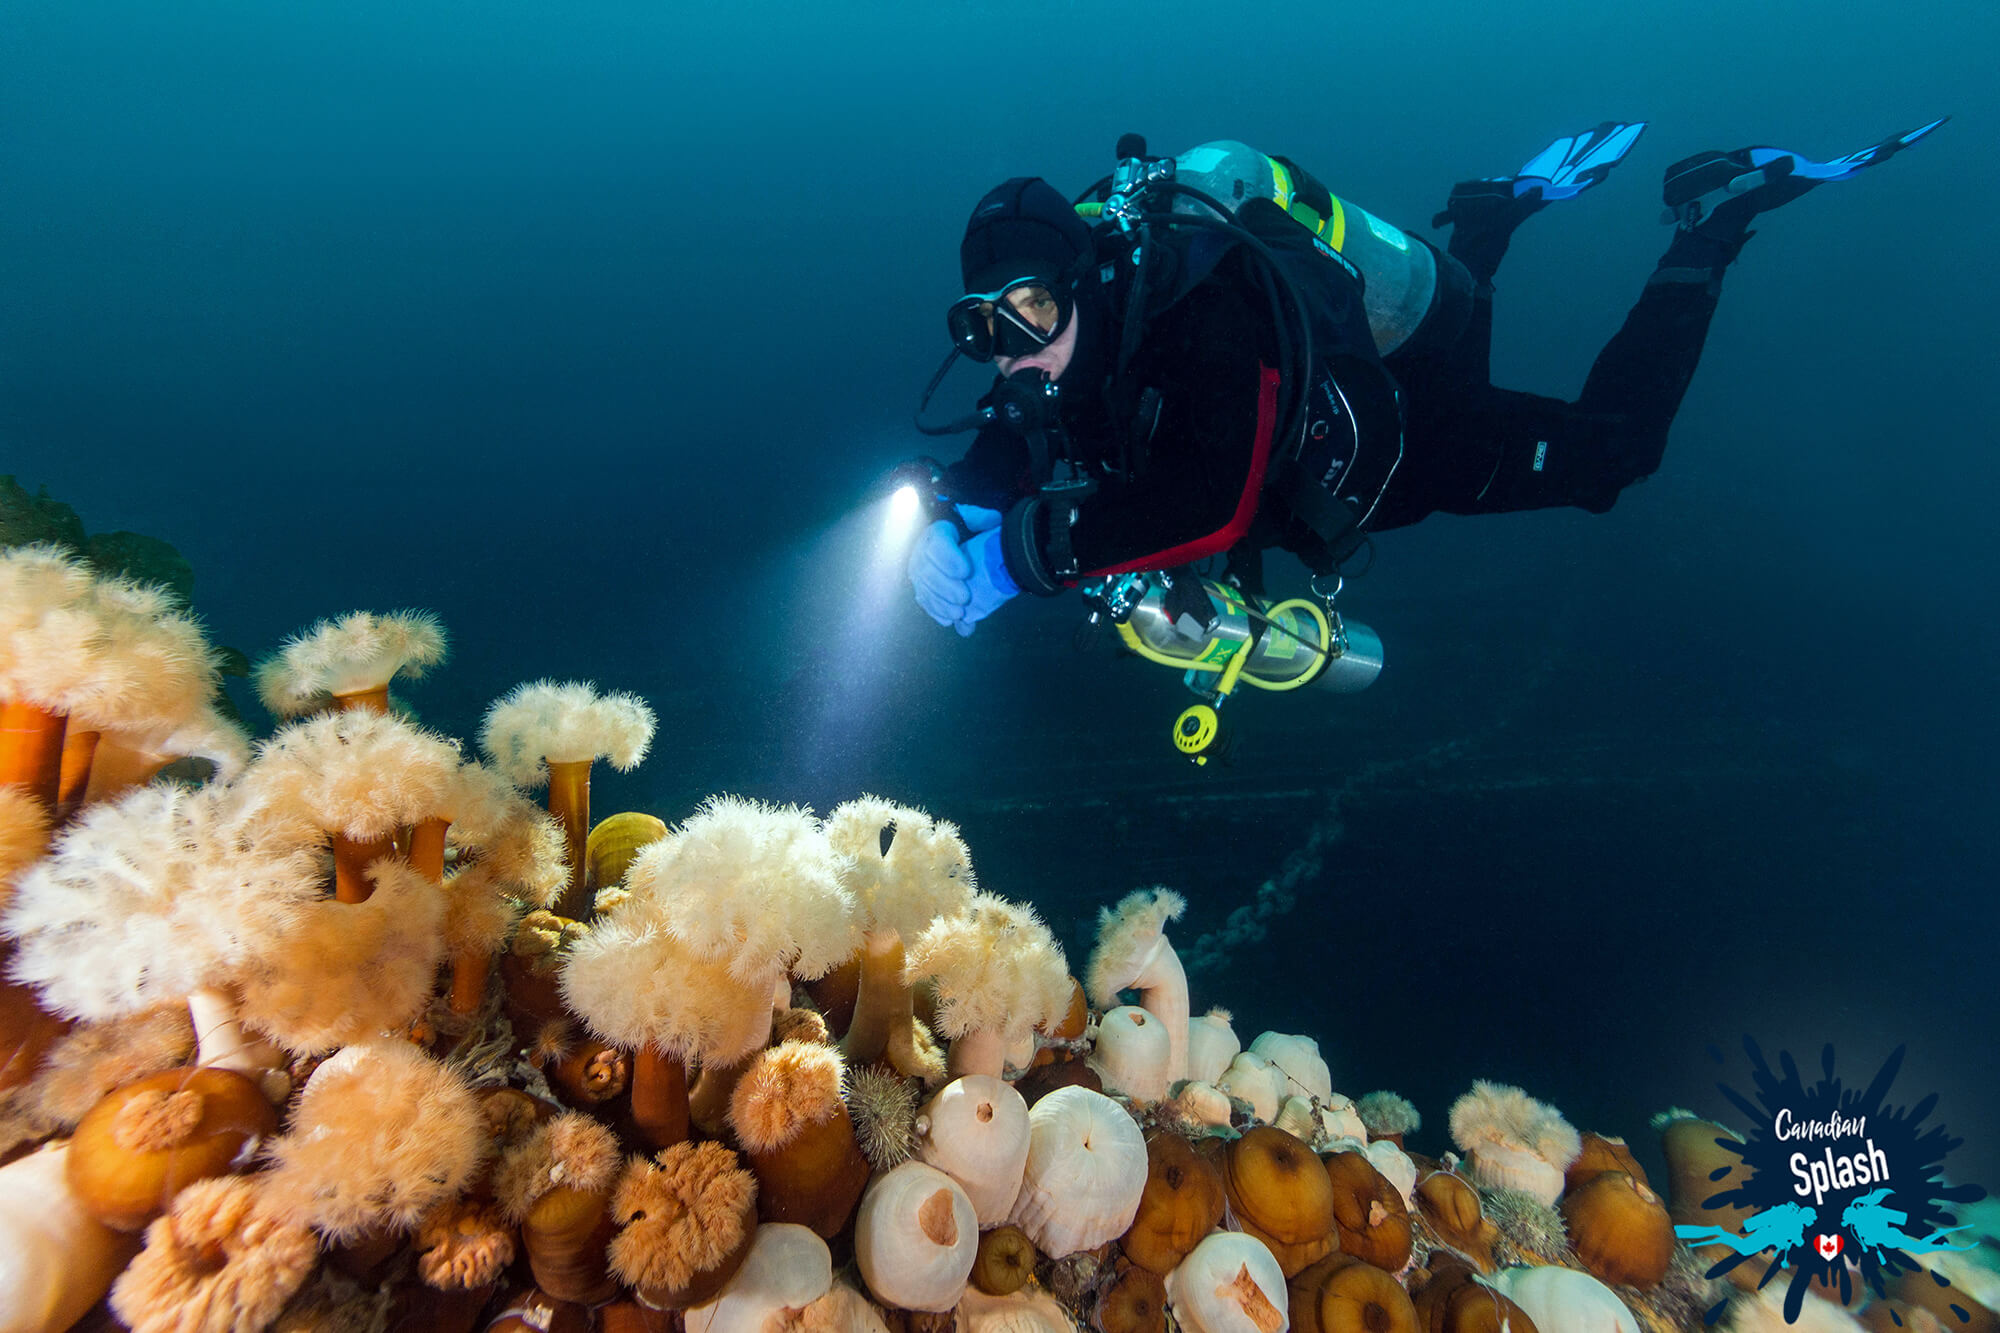 Joey Scuba Diving the PLM Shipwreck and Looking at Anemones in Newfoundland, Canadian Splash